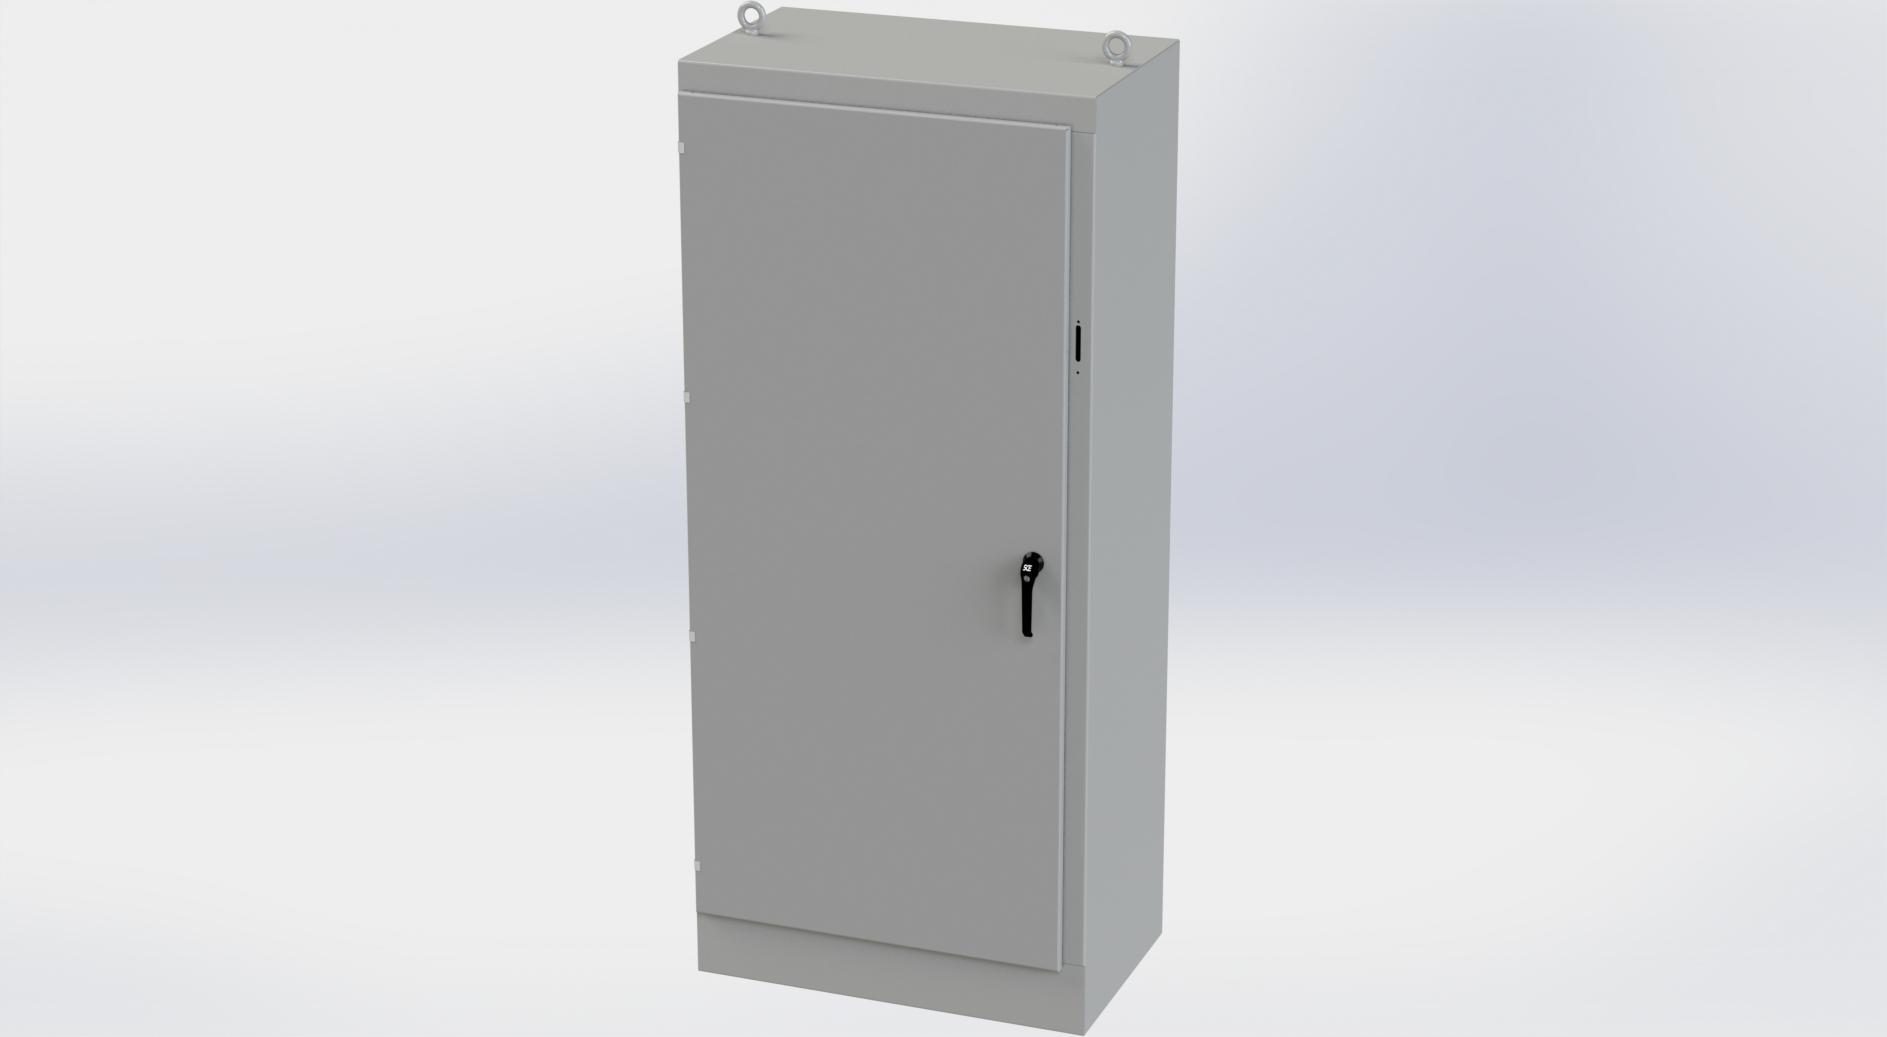 Saginaw Control SCE-90XM4024 1DR XM Enclosure, Height:90.00", Width:39.50", Depth:24.00", ANSI-61 gray powder coating inside and out. Sub-panels are powder coated white.  